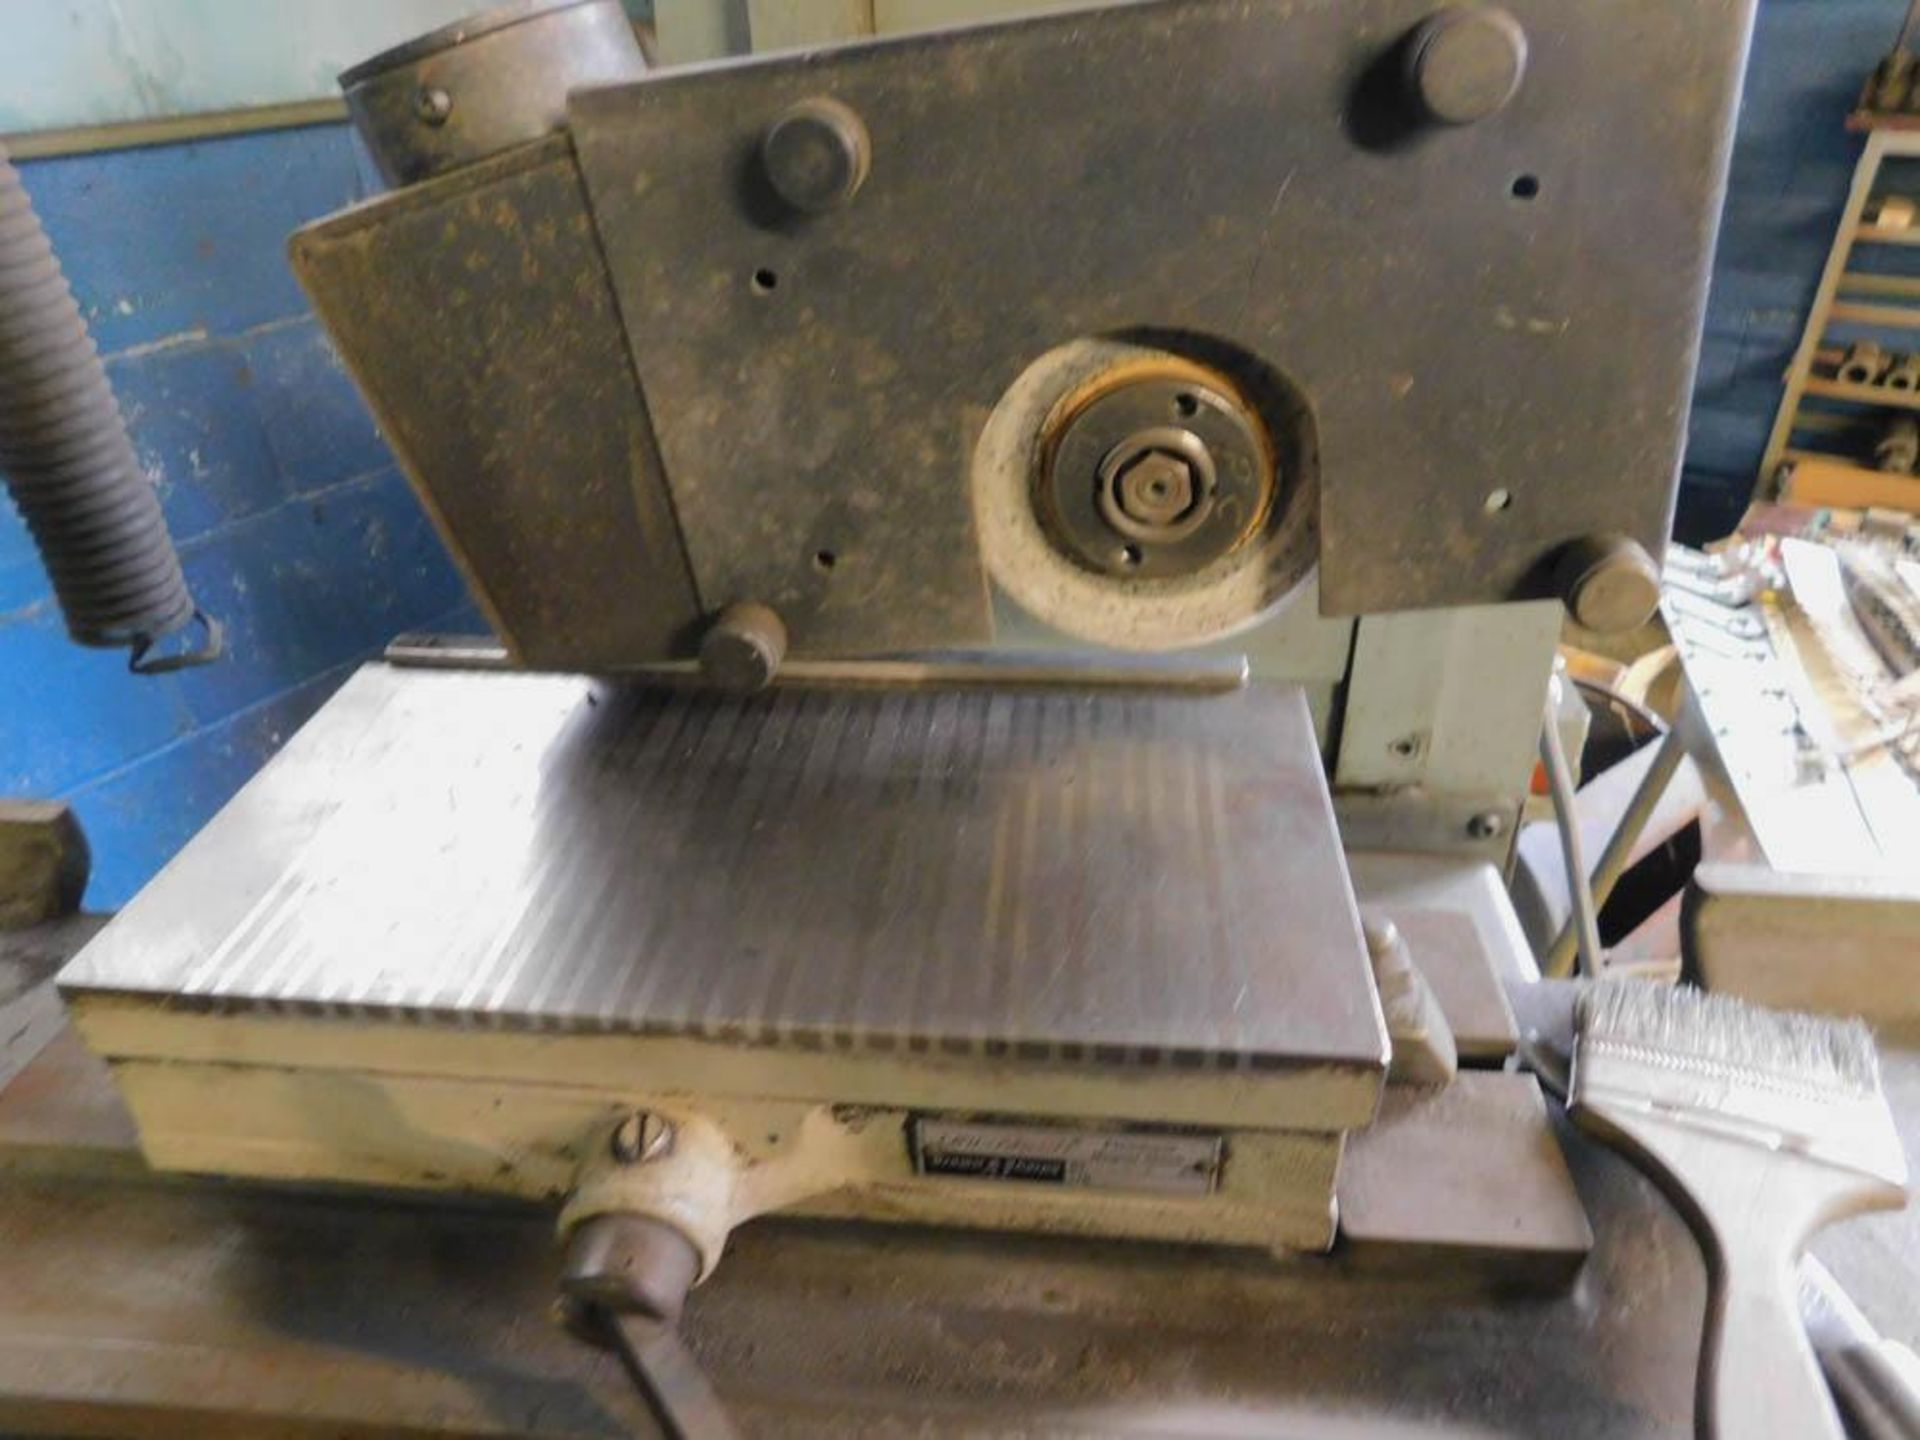 BROWN & SHARPE ""MICROMASTER 510"" HAND FEED SURFACE GRINDER - Image 3 of 4